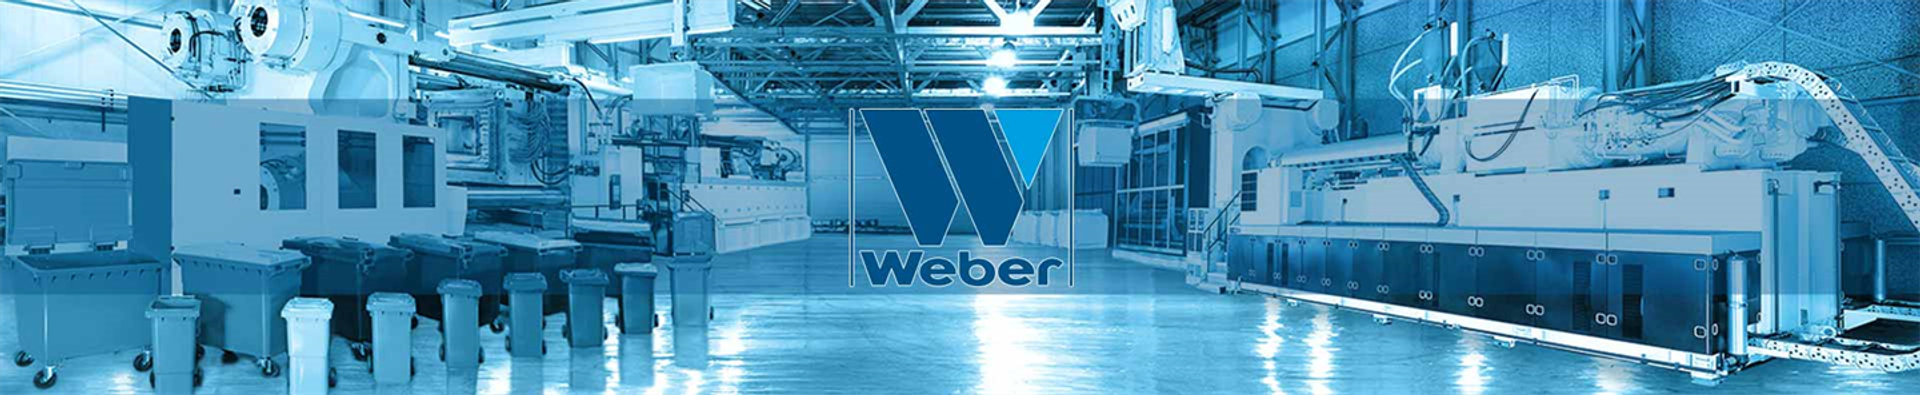 Wheelie bins & Waste containers Factory Weber GmbH & Co. KG